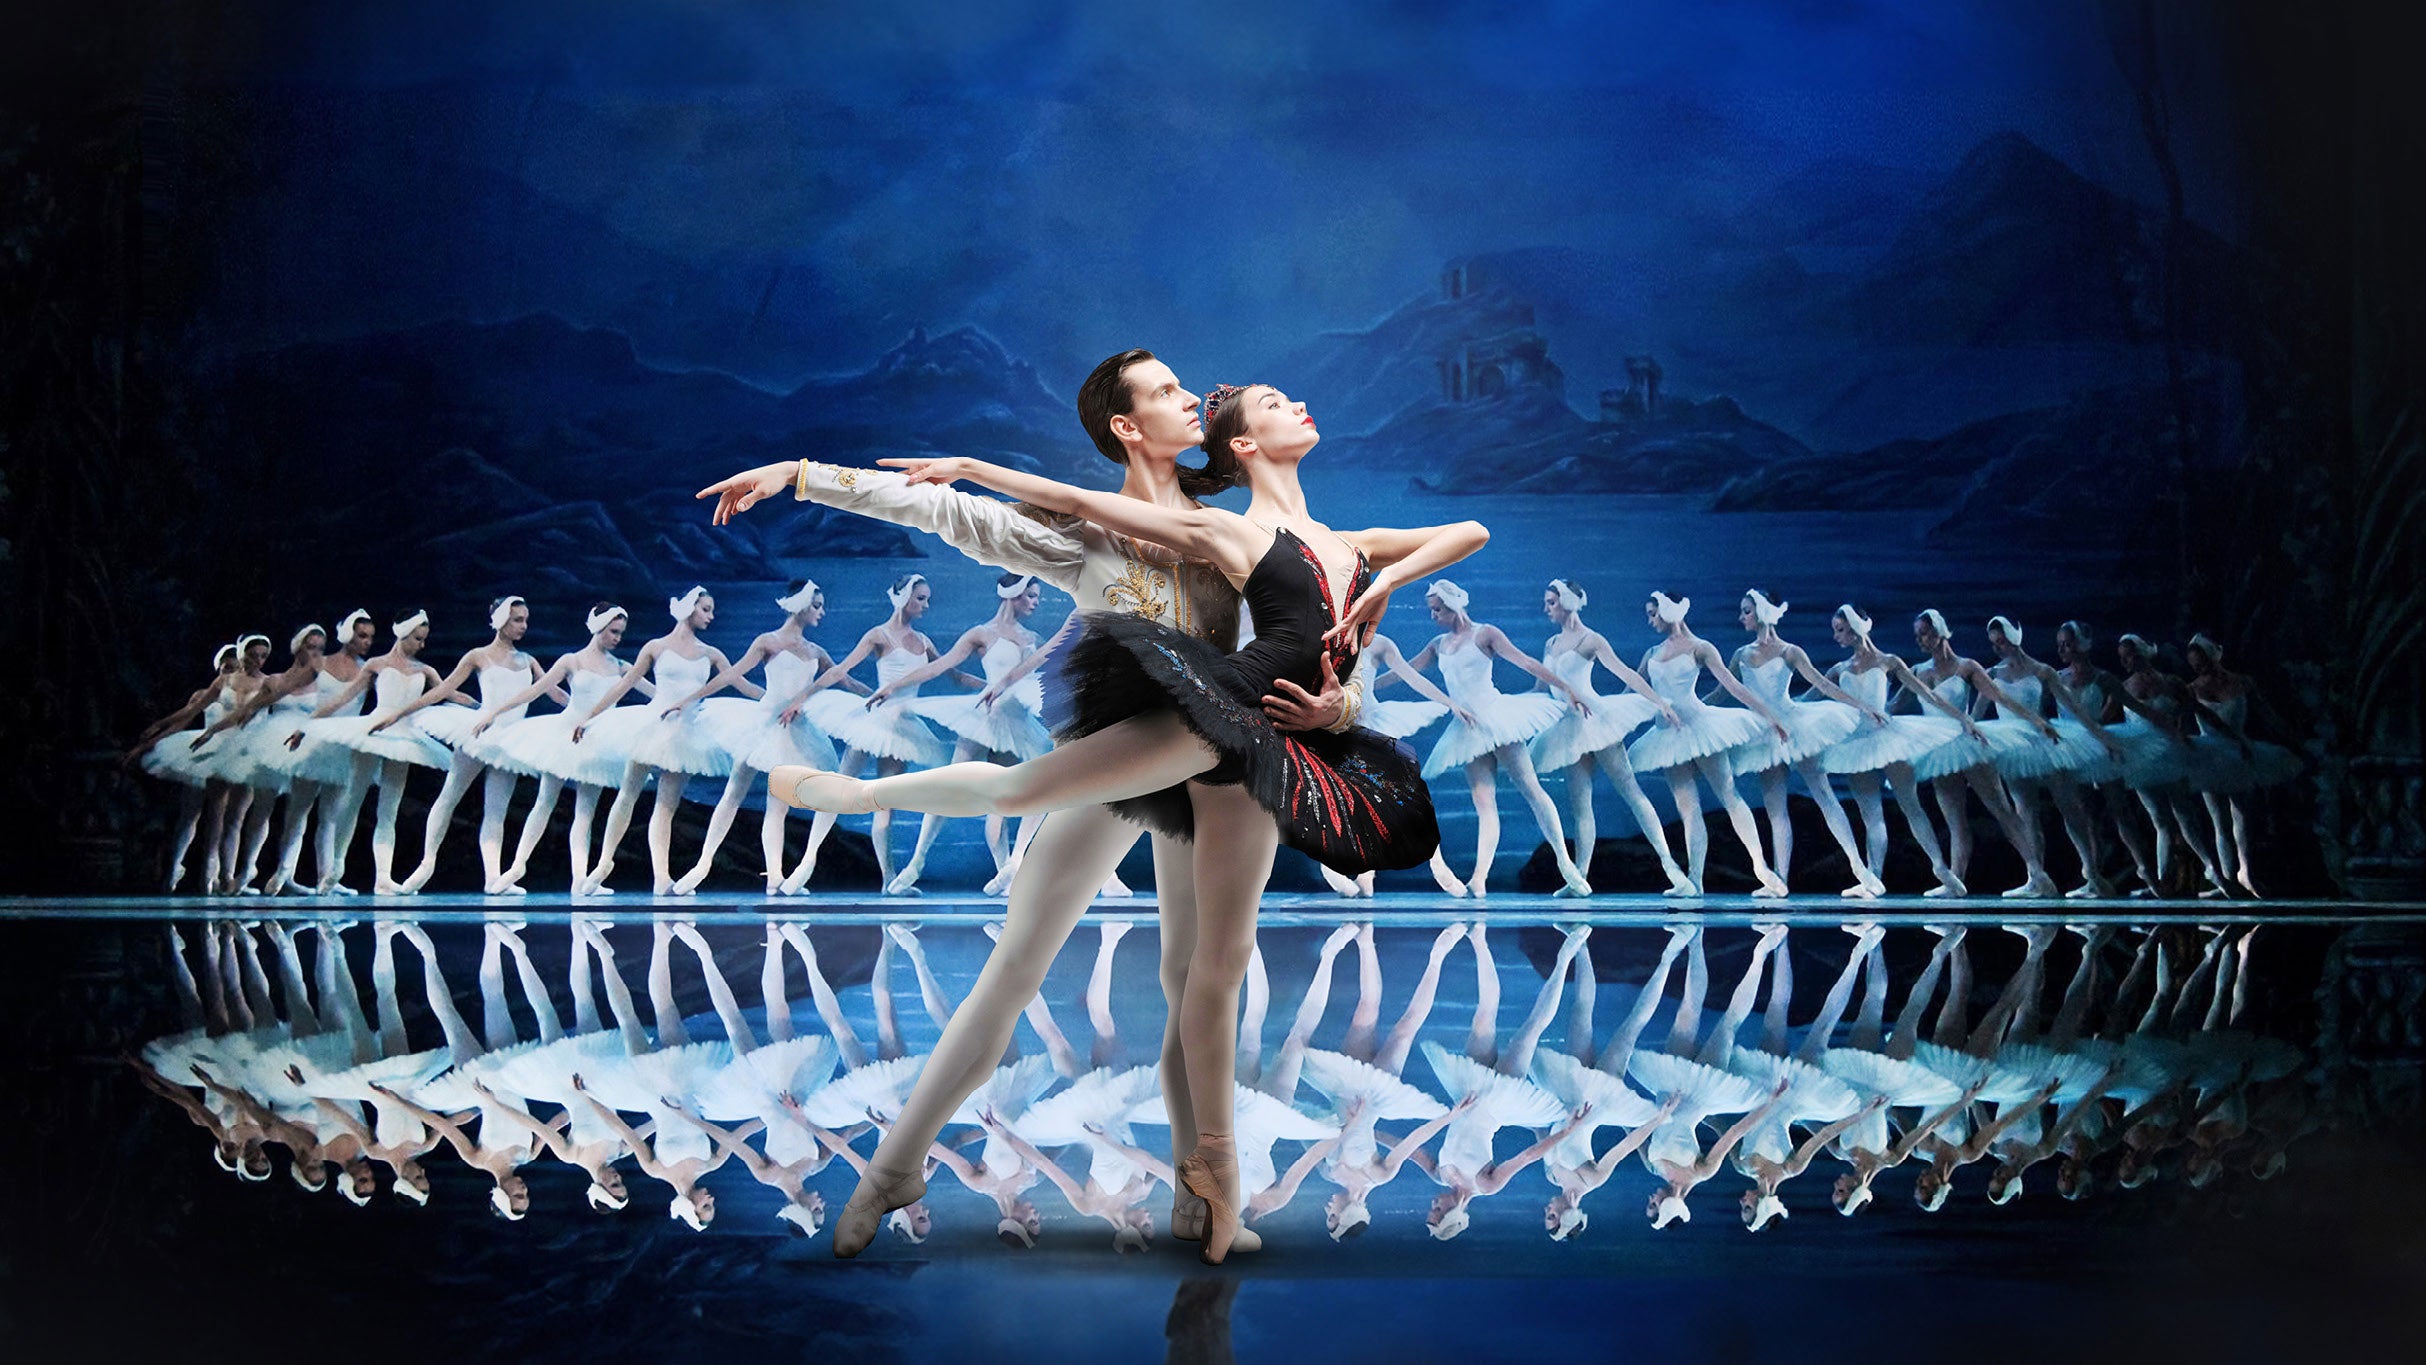 State Ballet Theatre of Ukraine Presents Swan Lake pre-sale code for advance tickets in Hershey